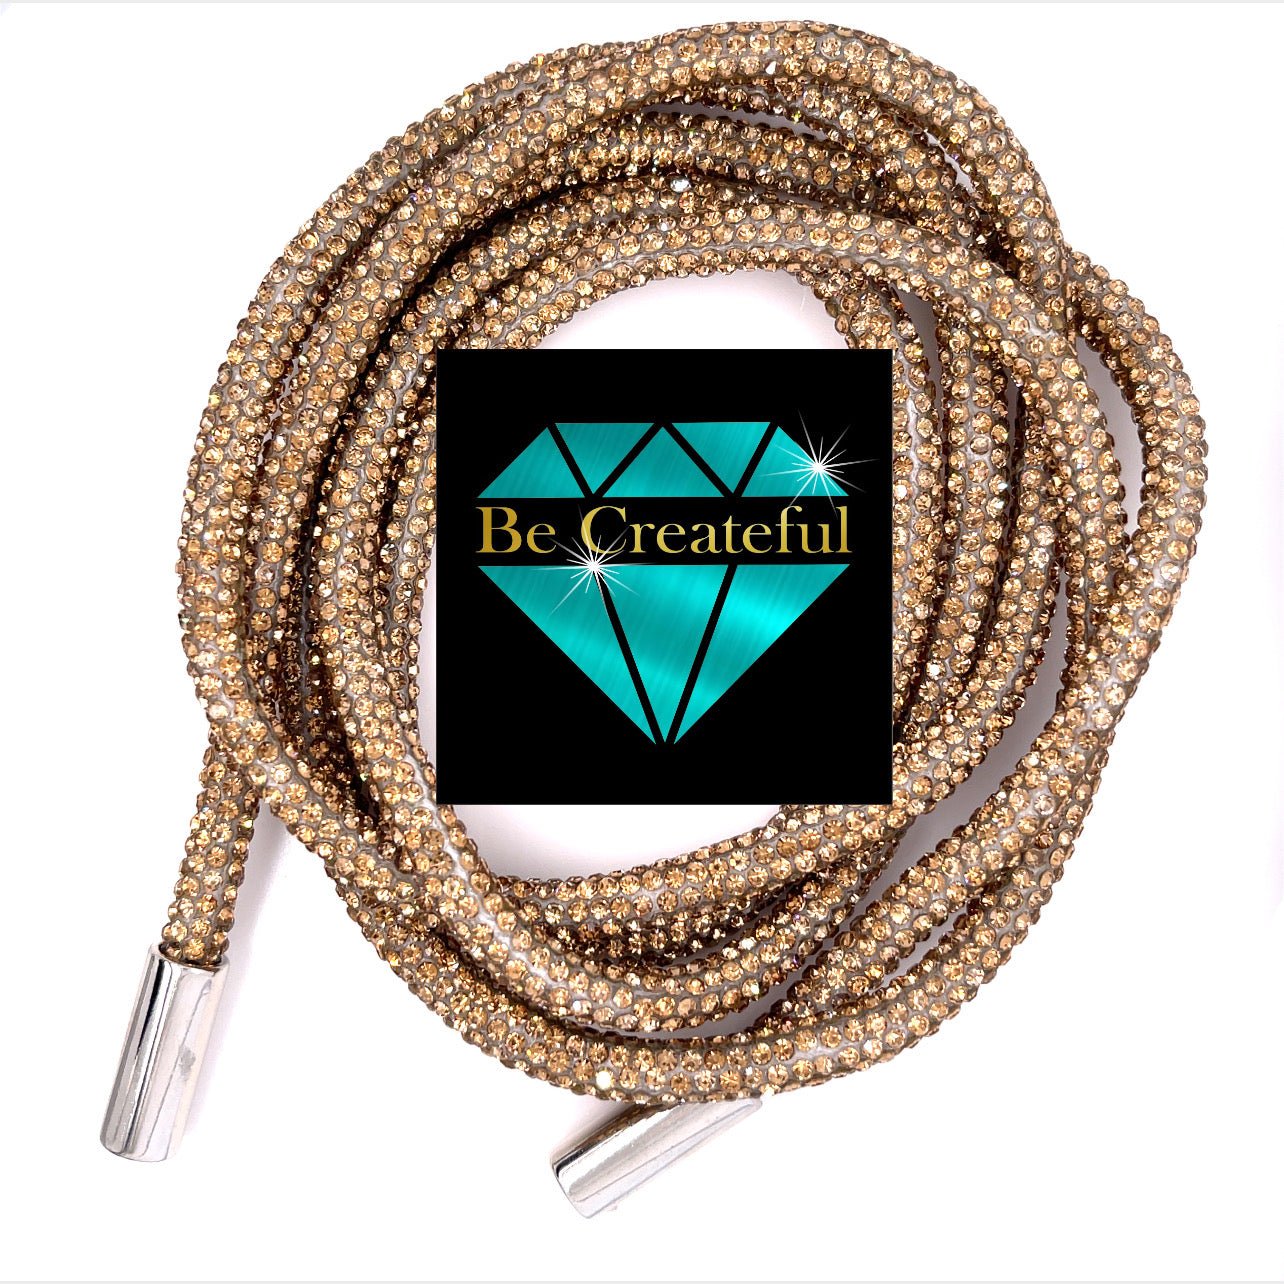 We have added these fun new crystal rhinestone hoodie string ropes